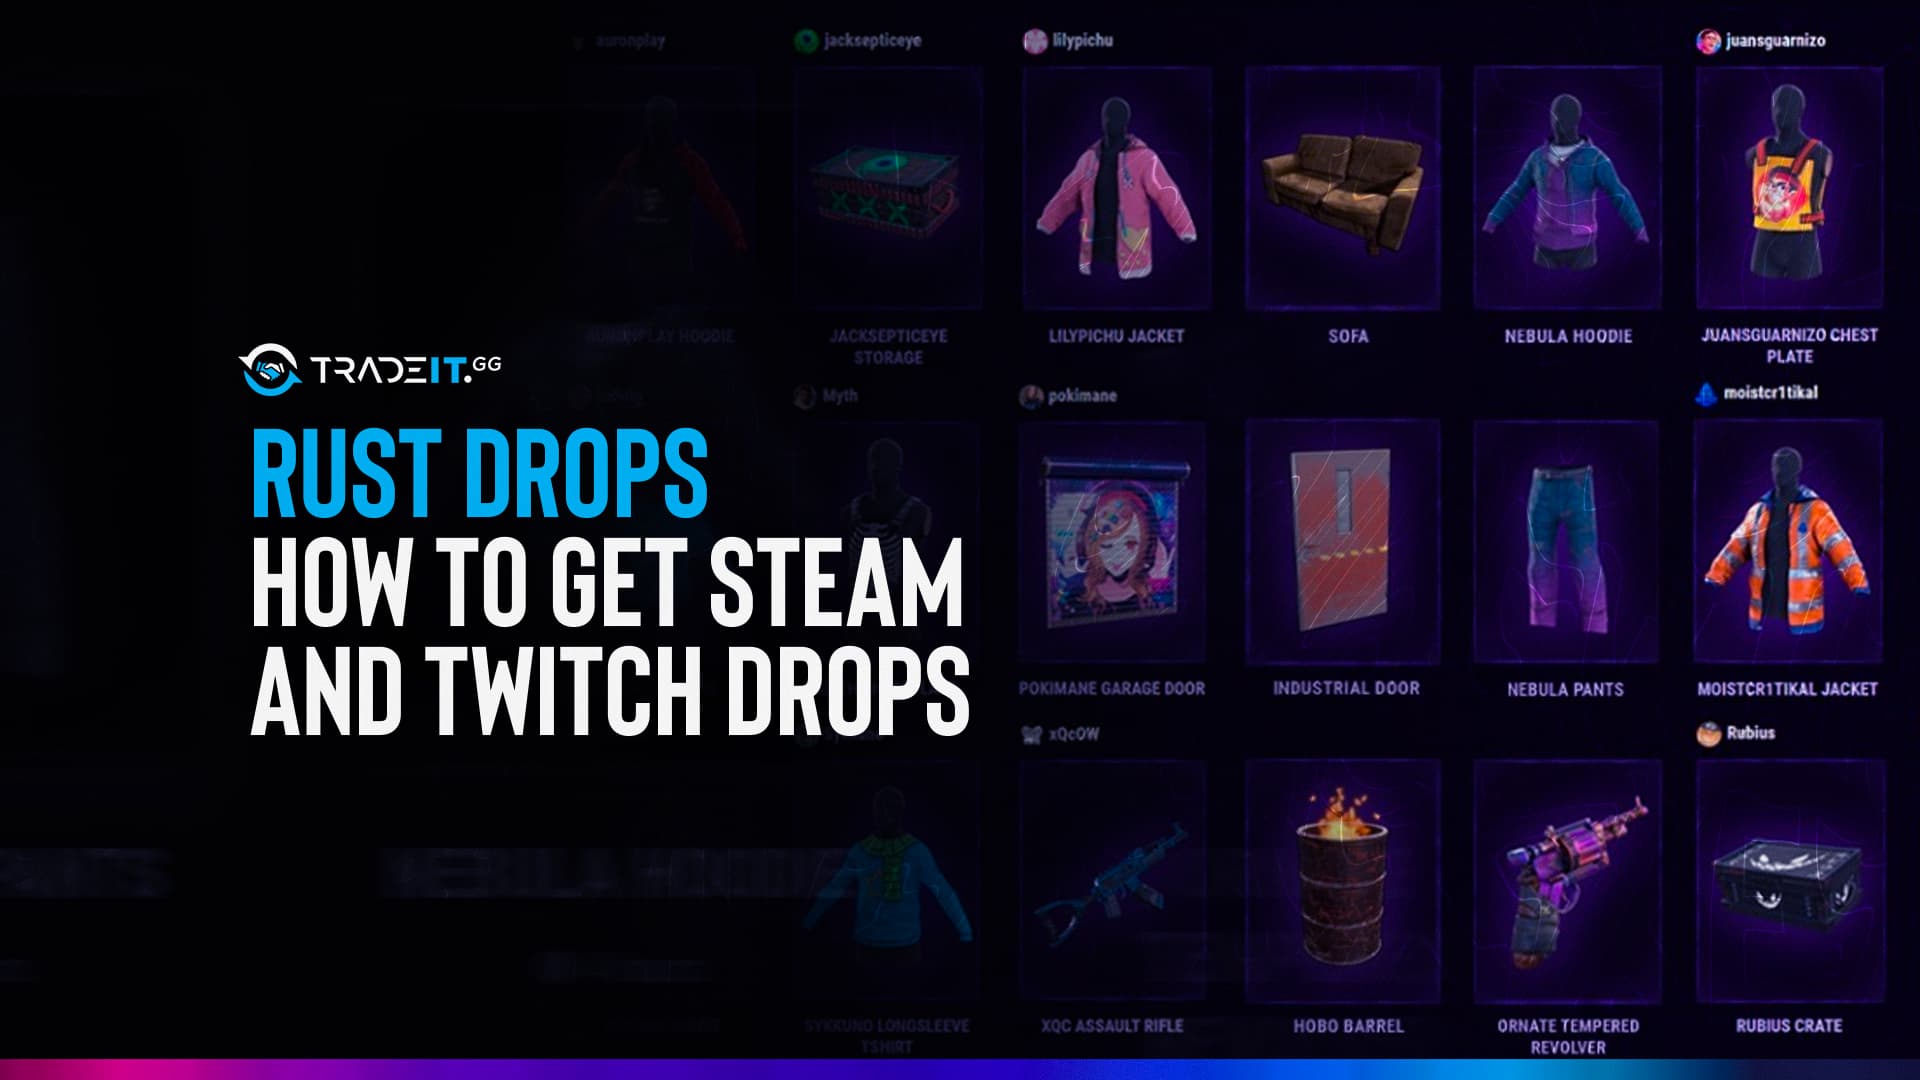 Rust Drops How to get Steam and Twitch Drops